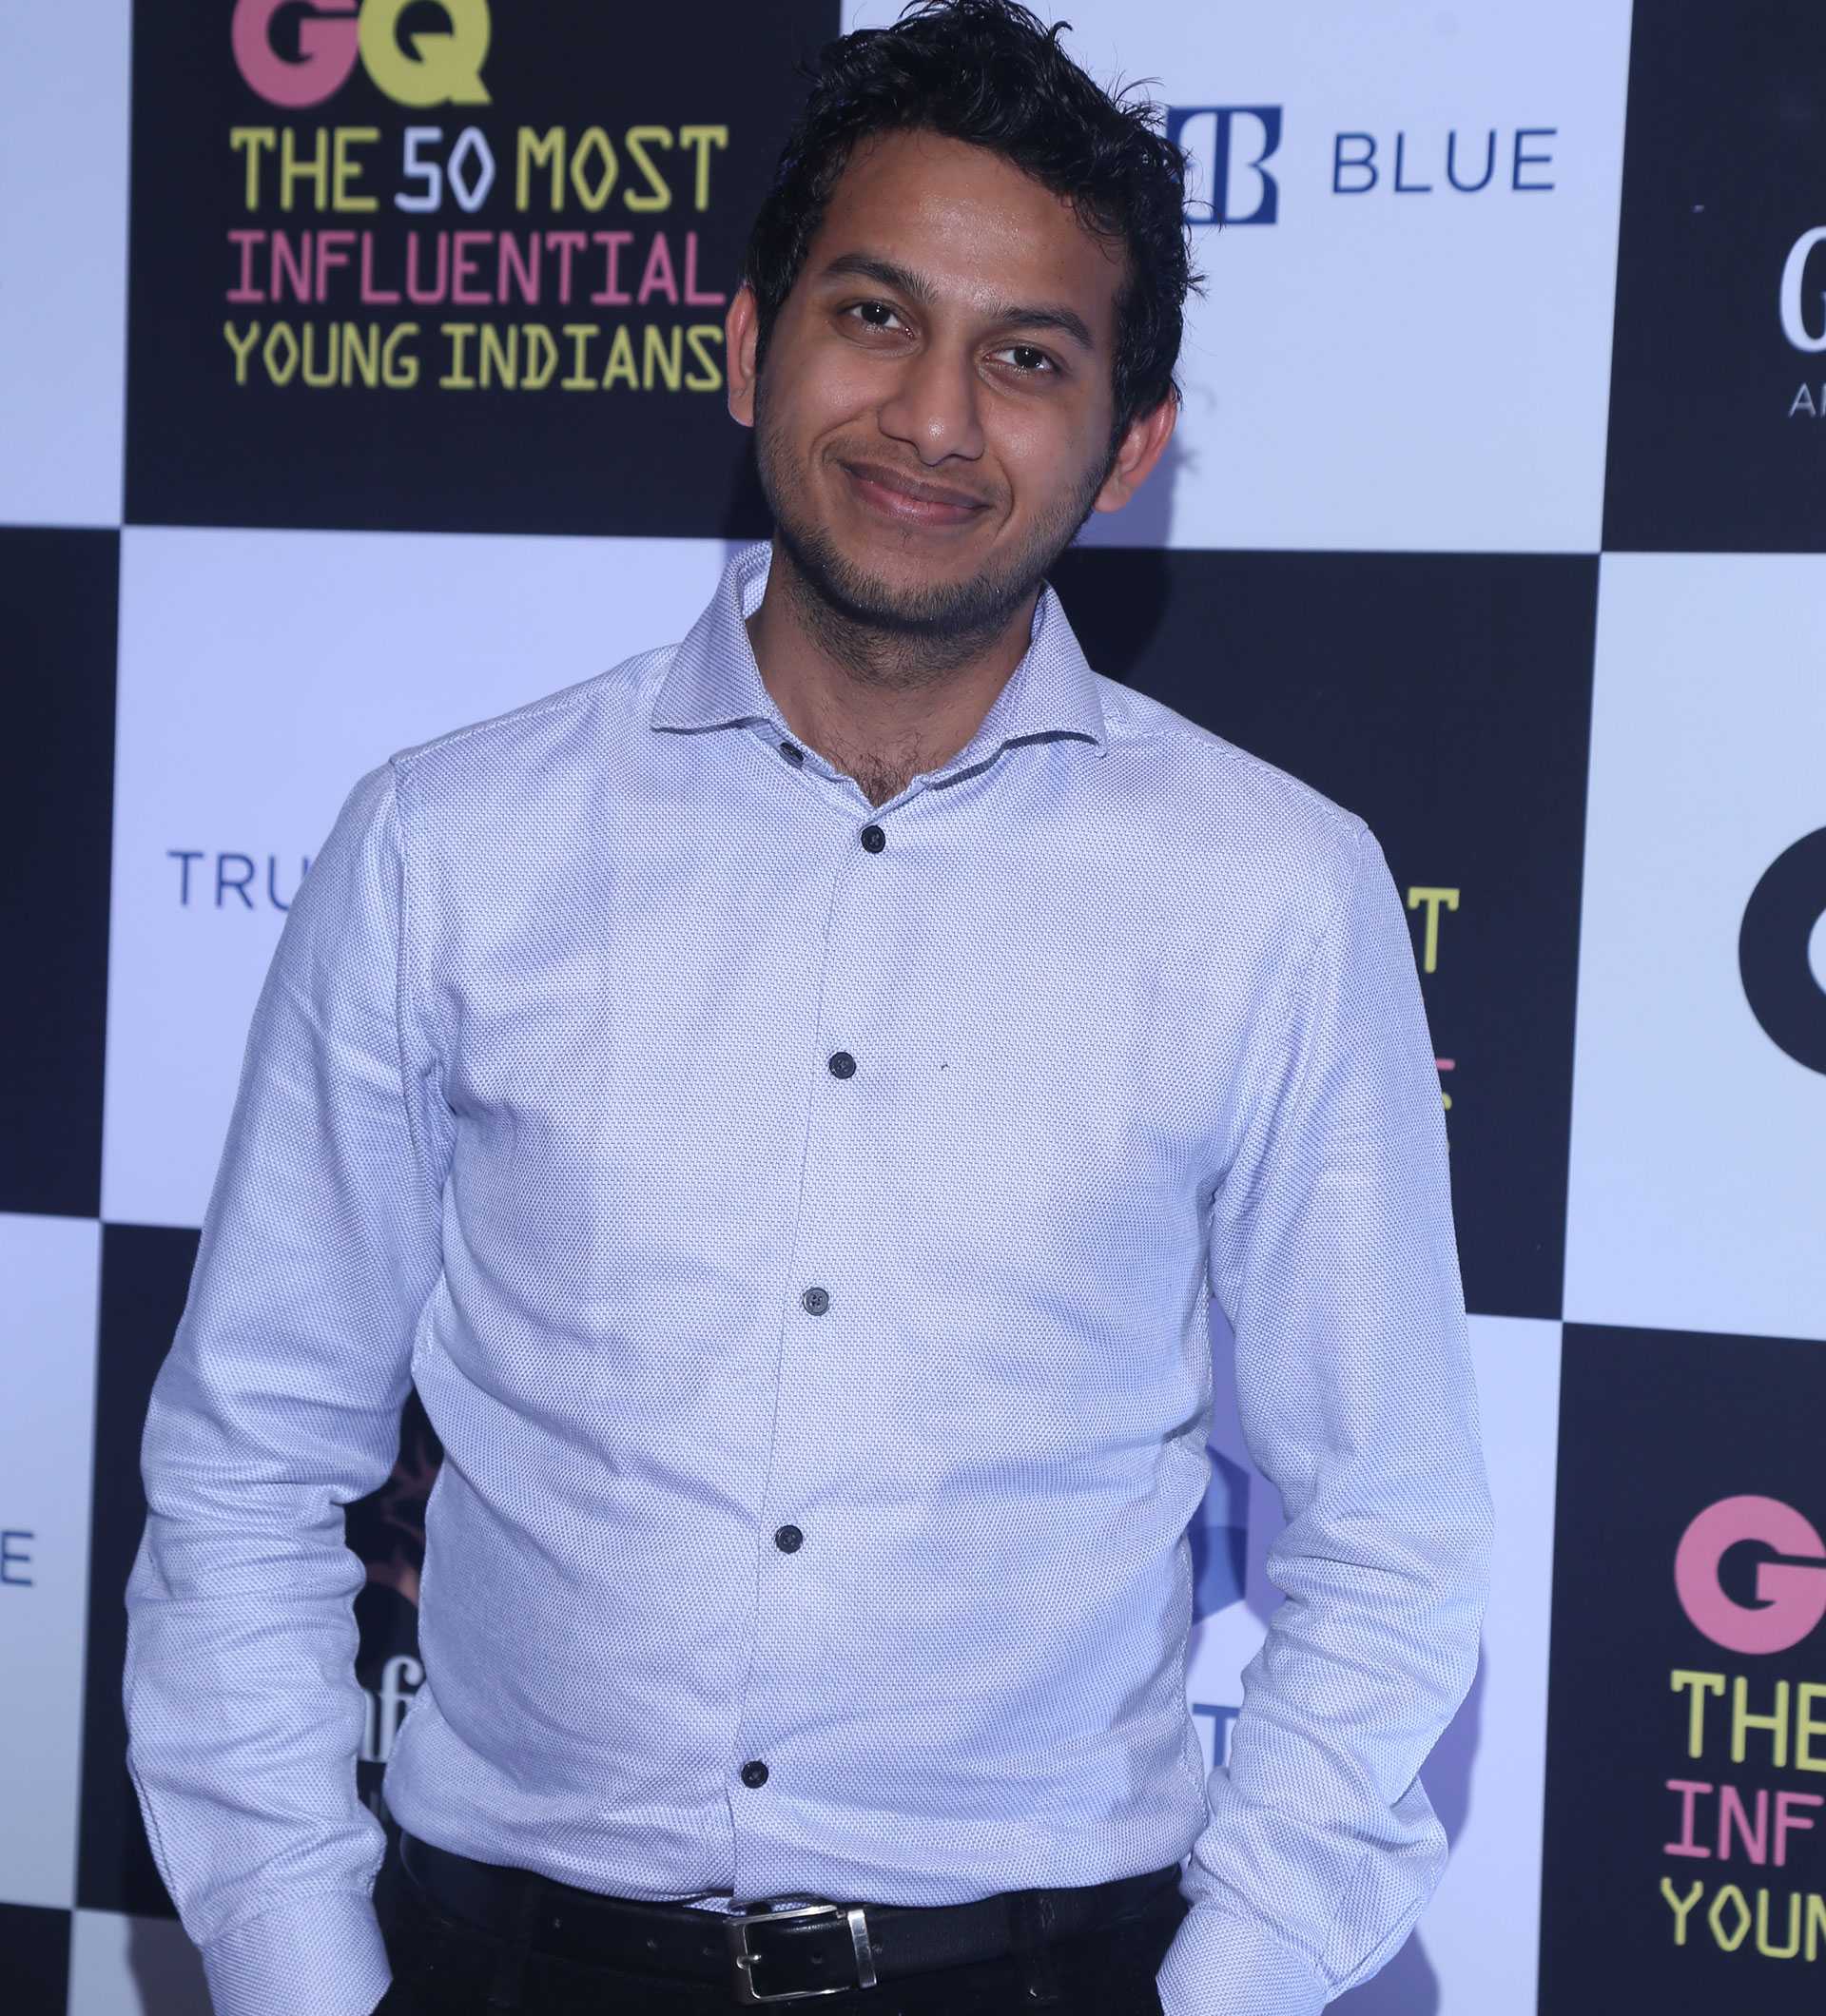 Story behind the success of Ritesh Agarwal (Founder of OYO Rooms)